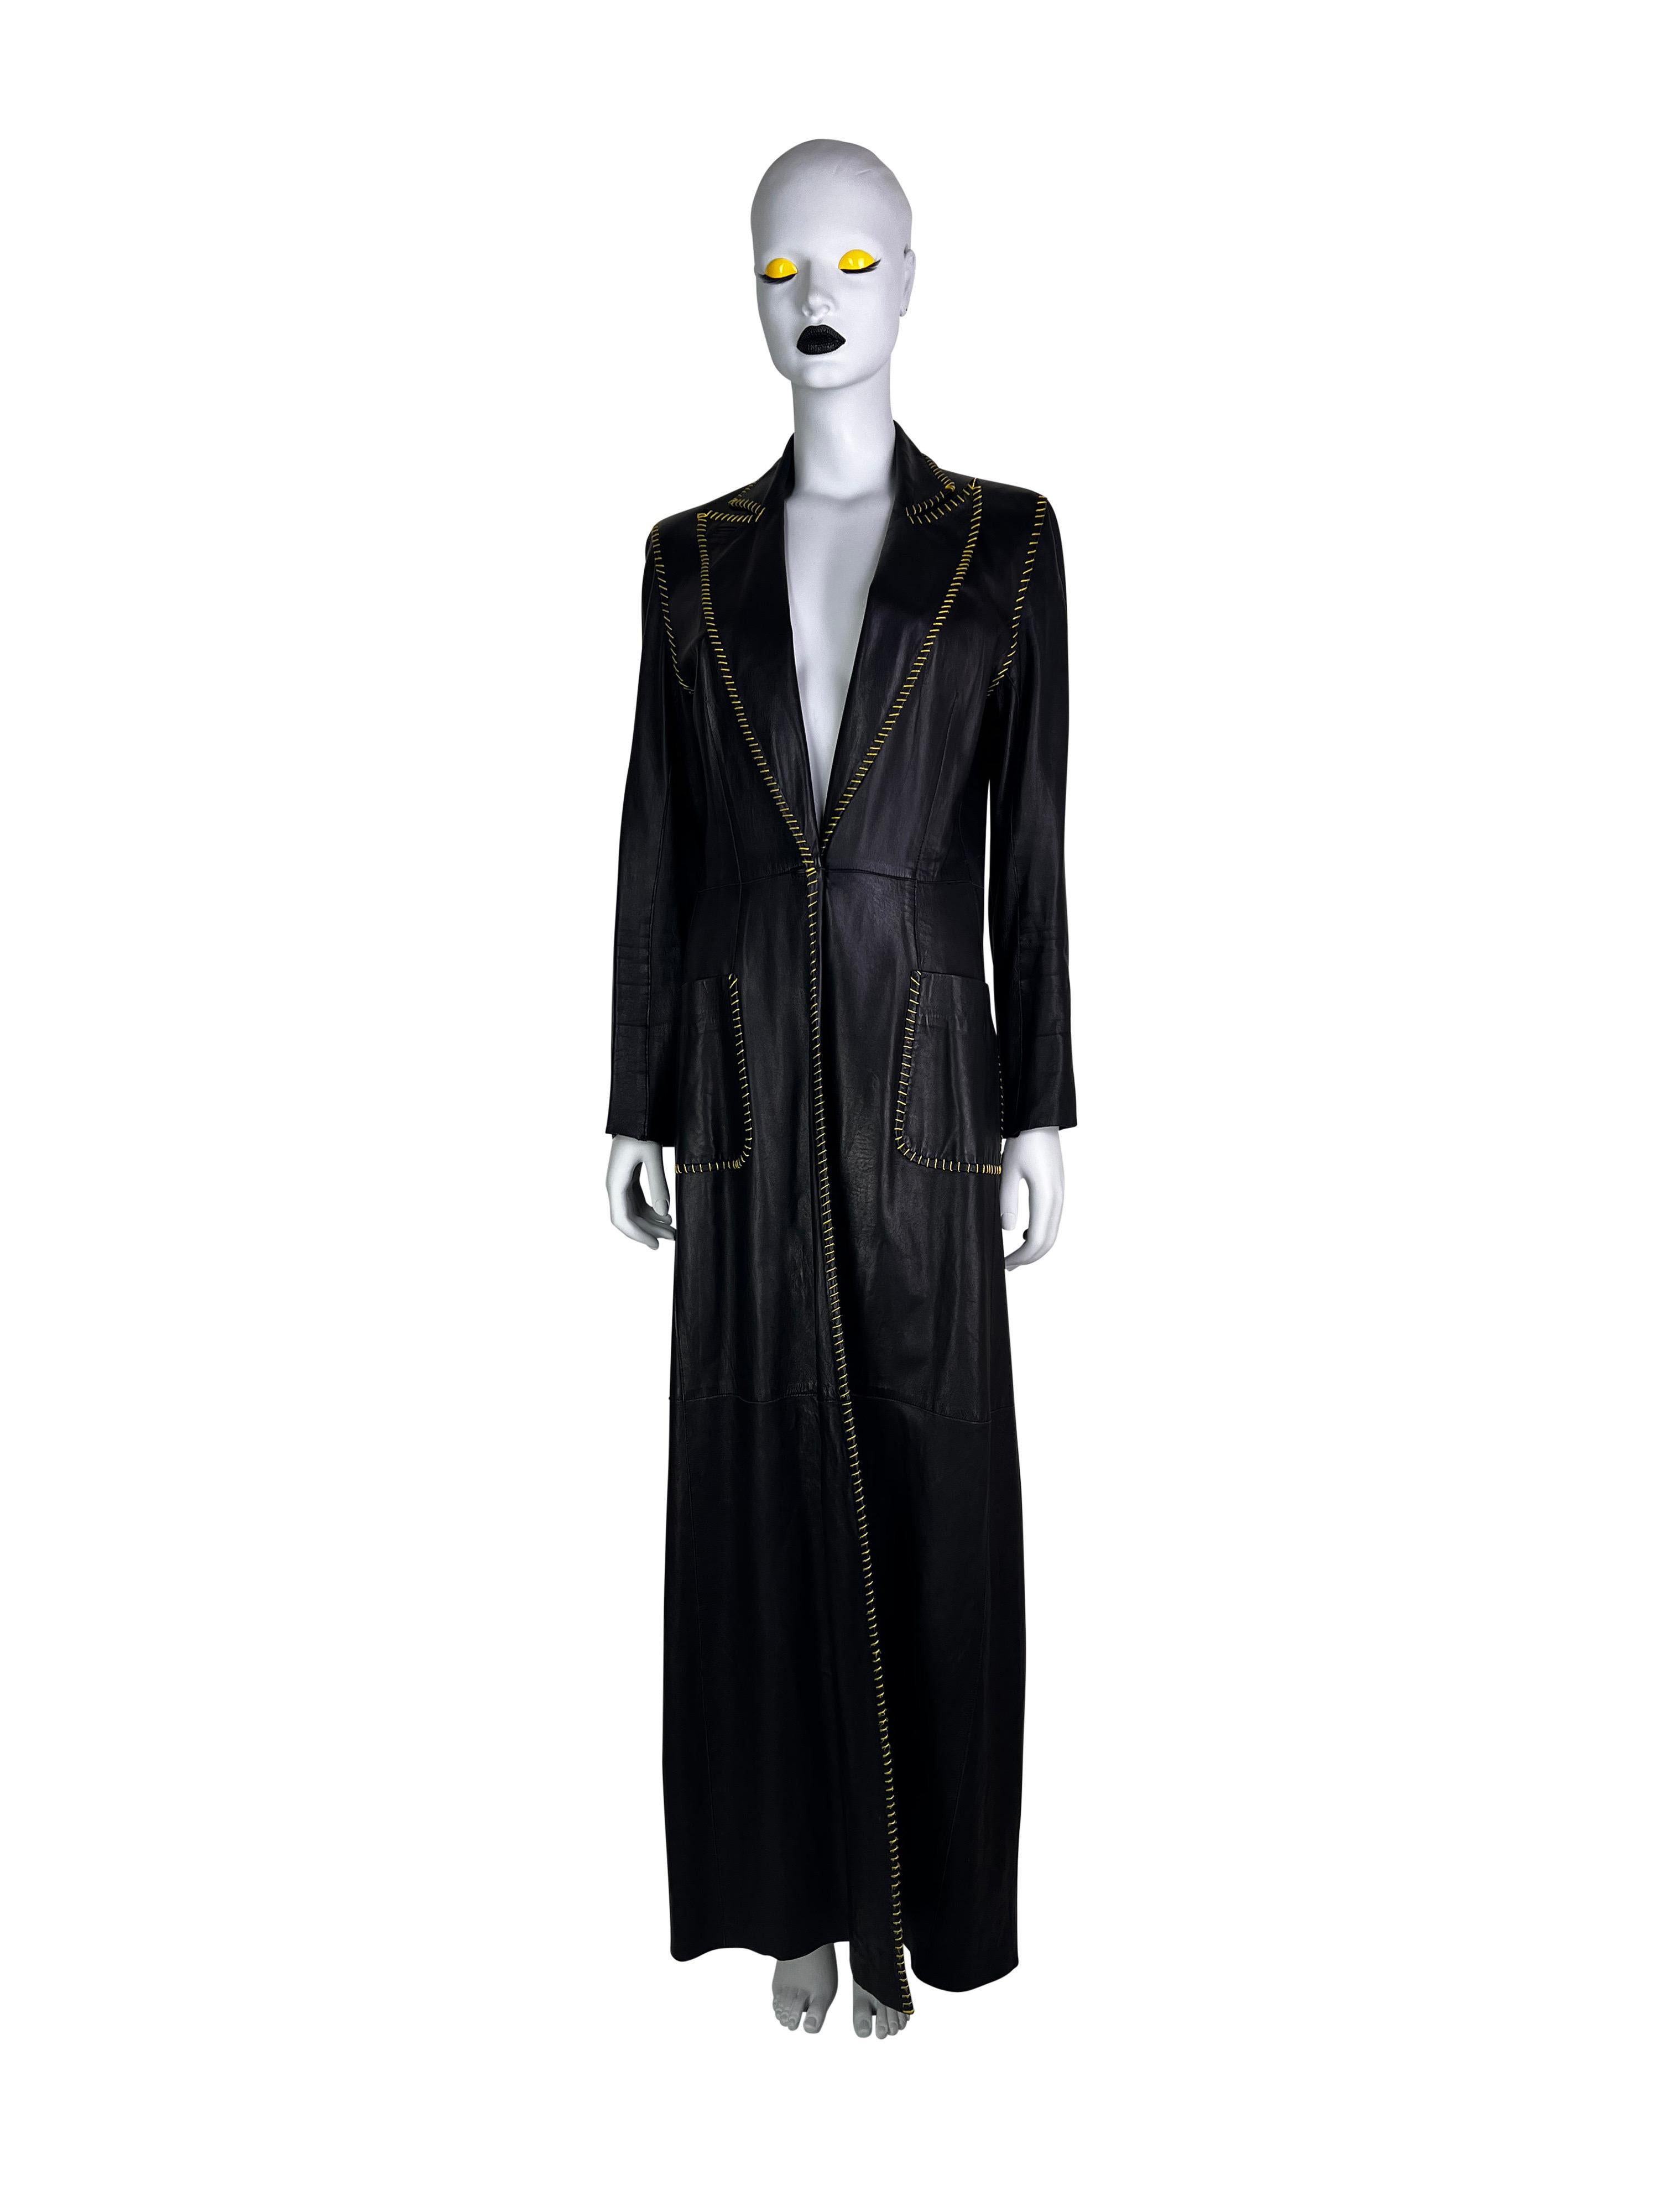 Alexander McQueen for Givenchy Spring 2000 Leather Coat For Sale 3